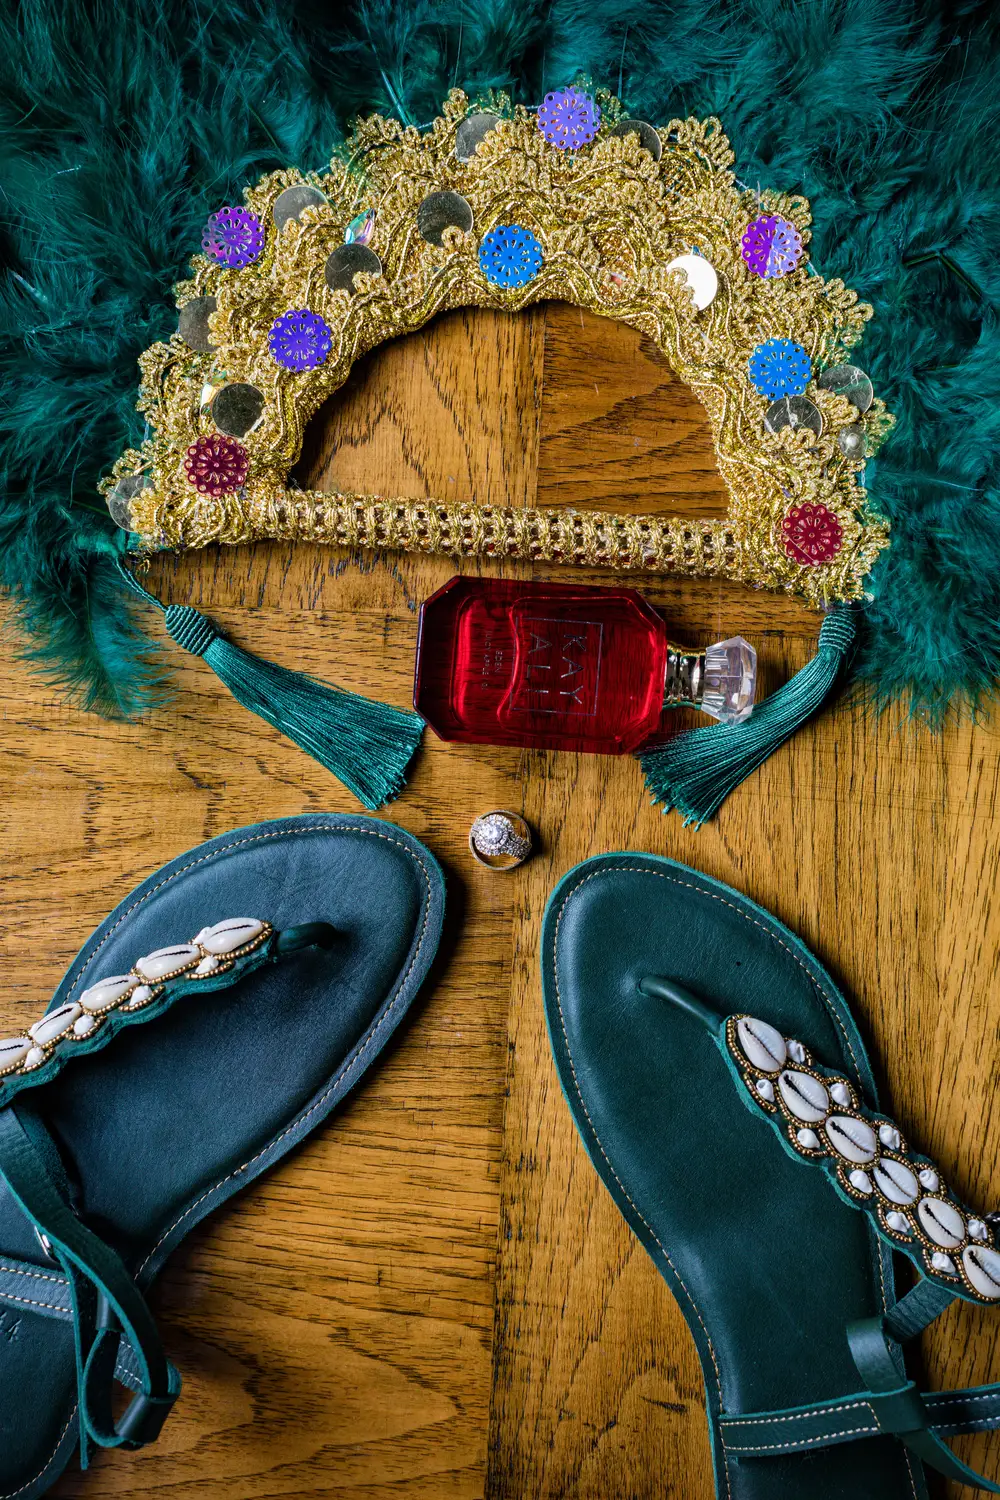 Leather shoes with a perfume bottle and green furry hand fan